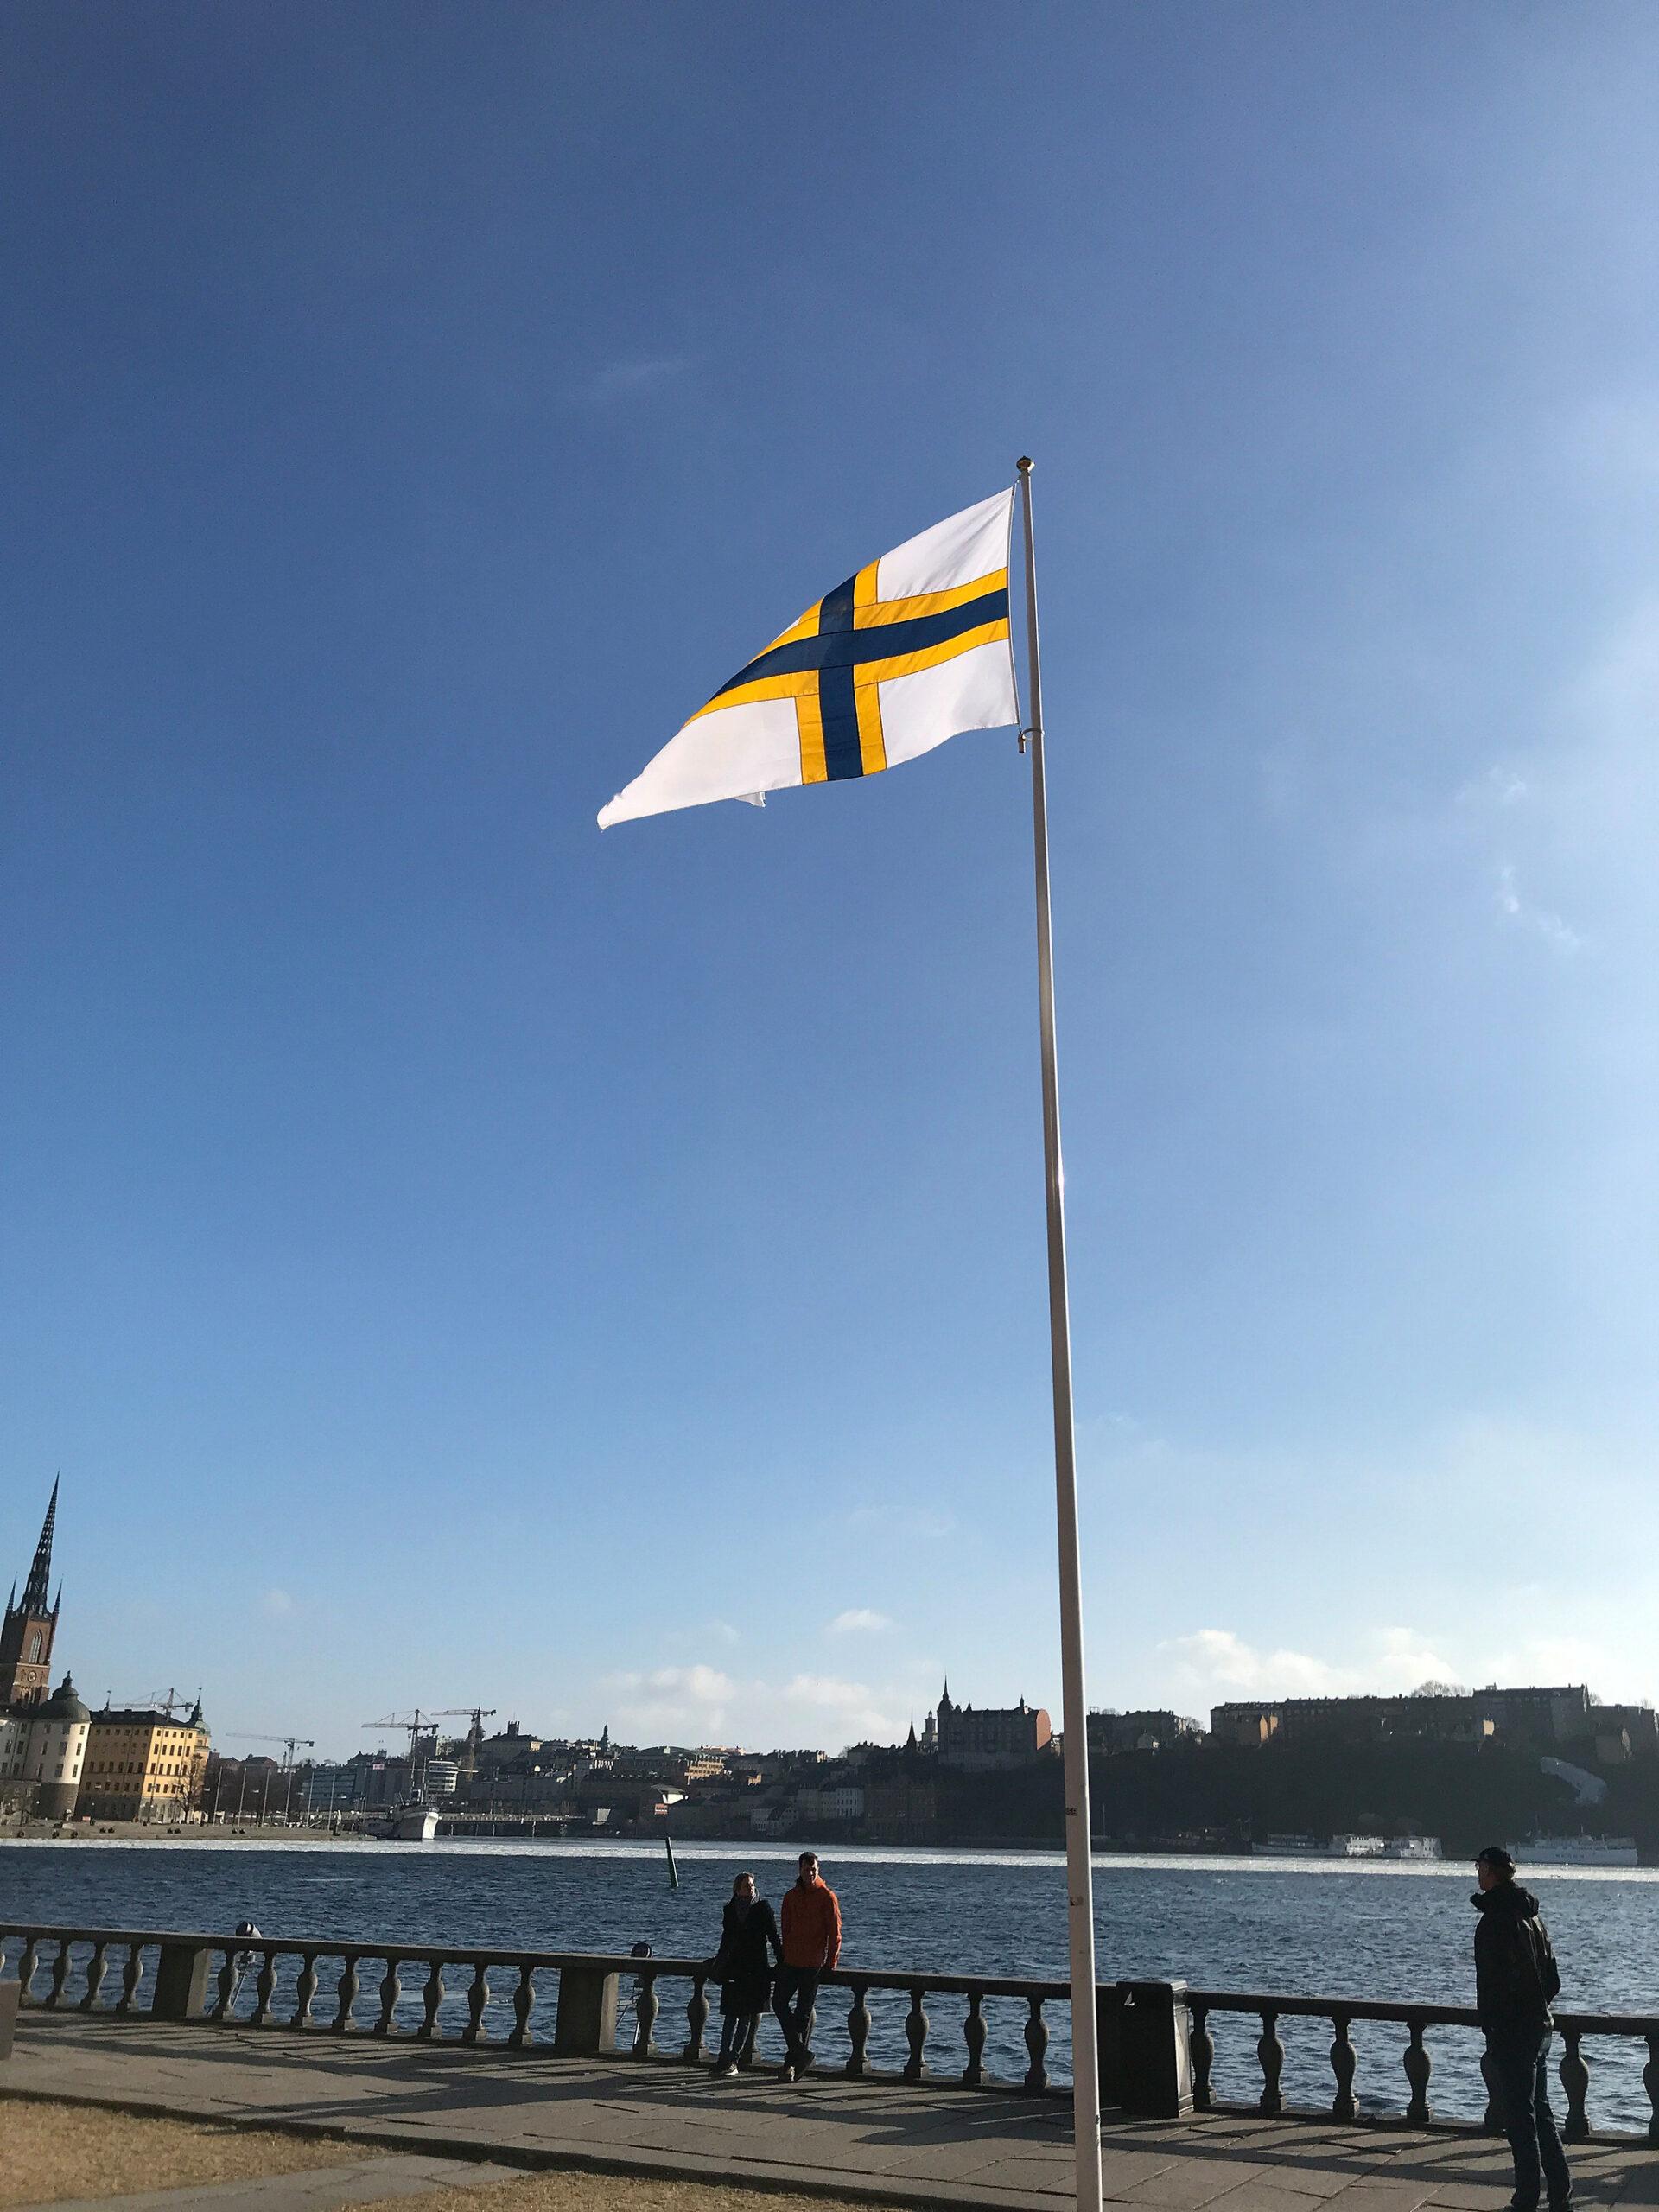 The Swedish-Finnish flag on a flag pole by the water.